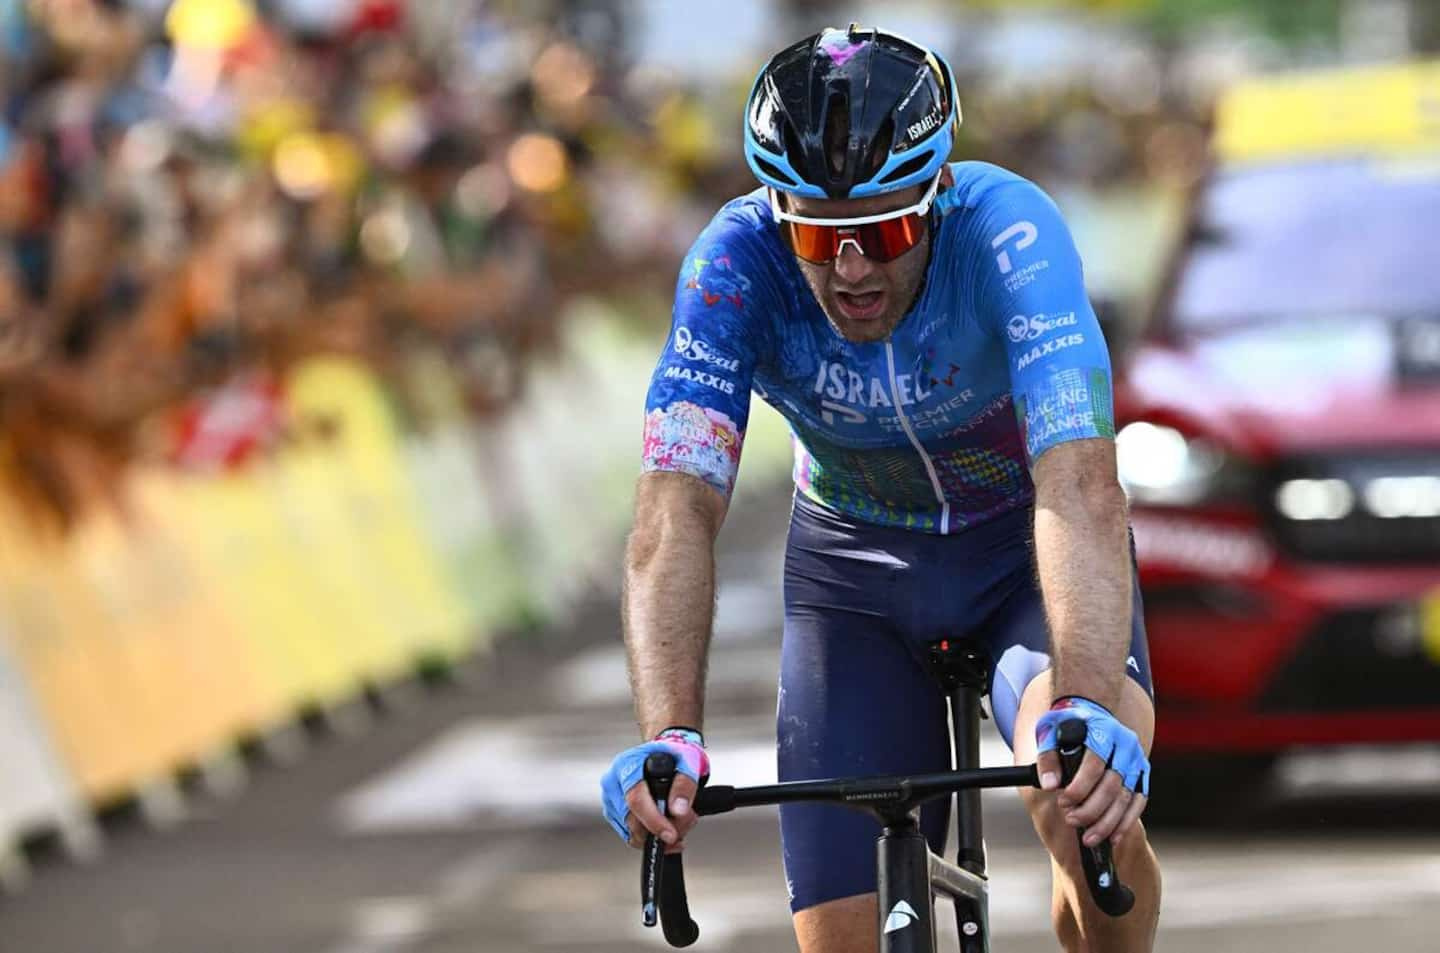 Tour de France: Hugo Houle takes third place in the 13th stage